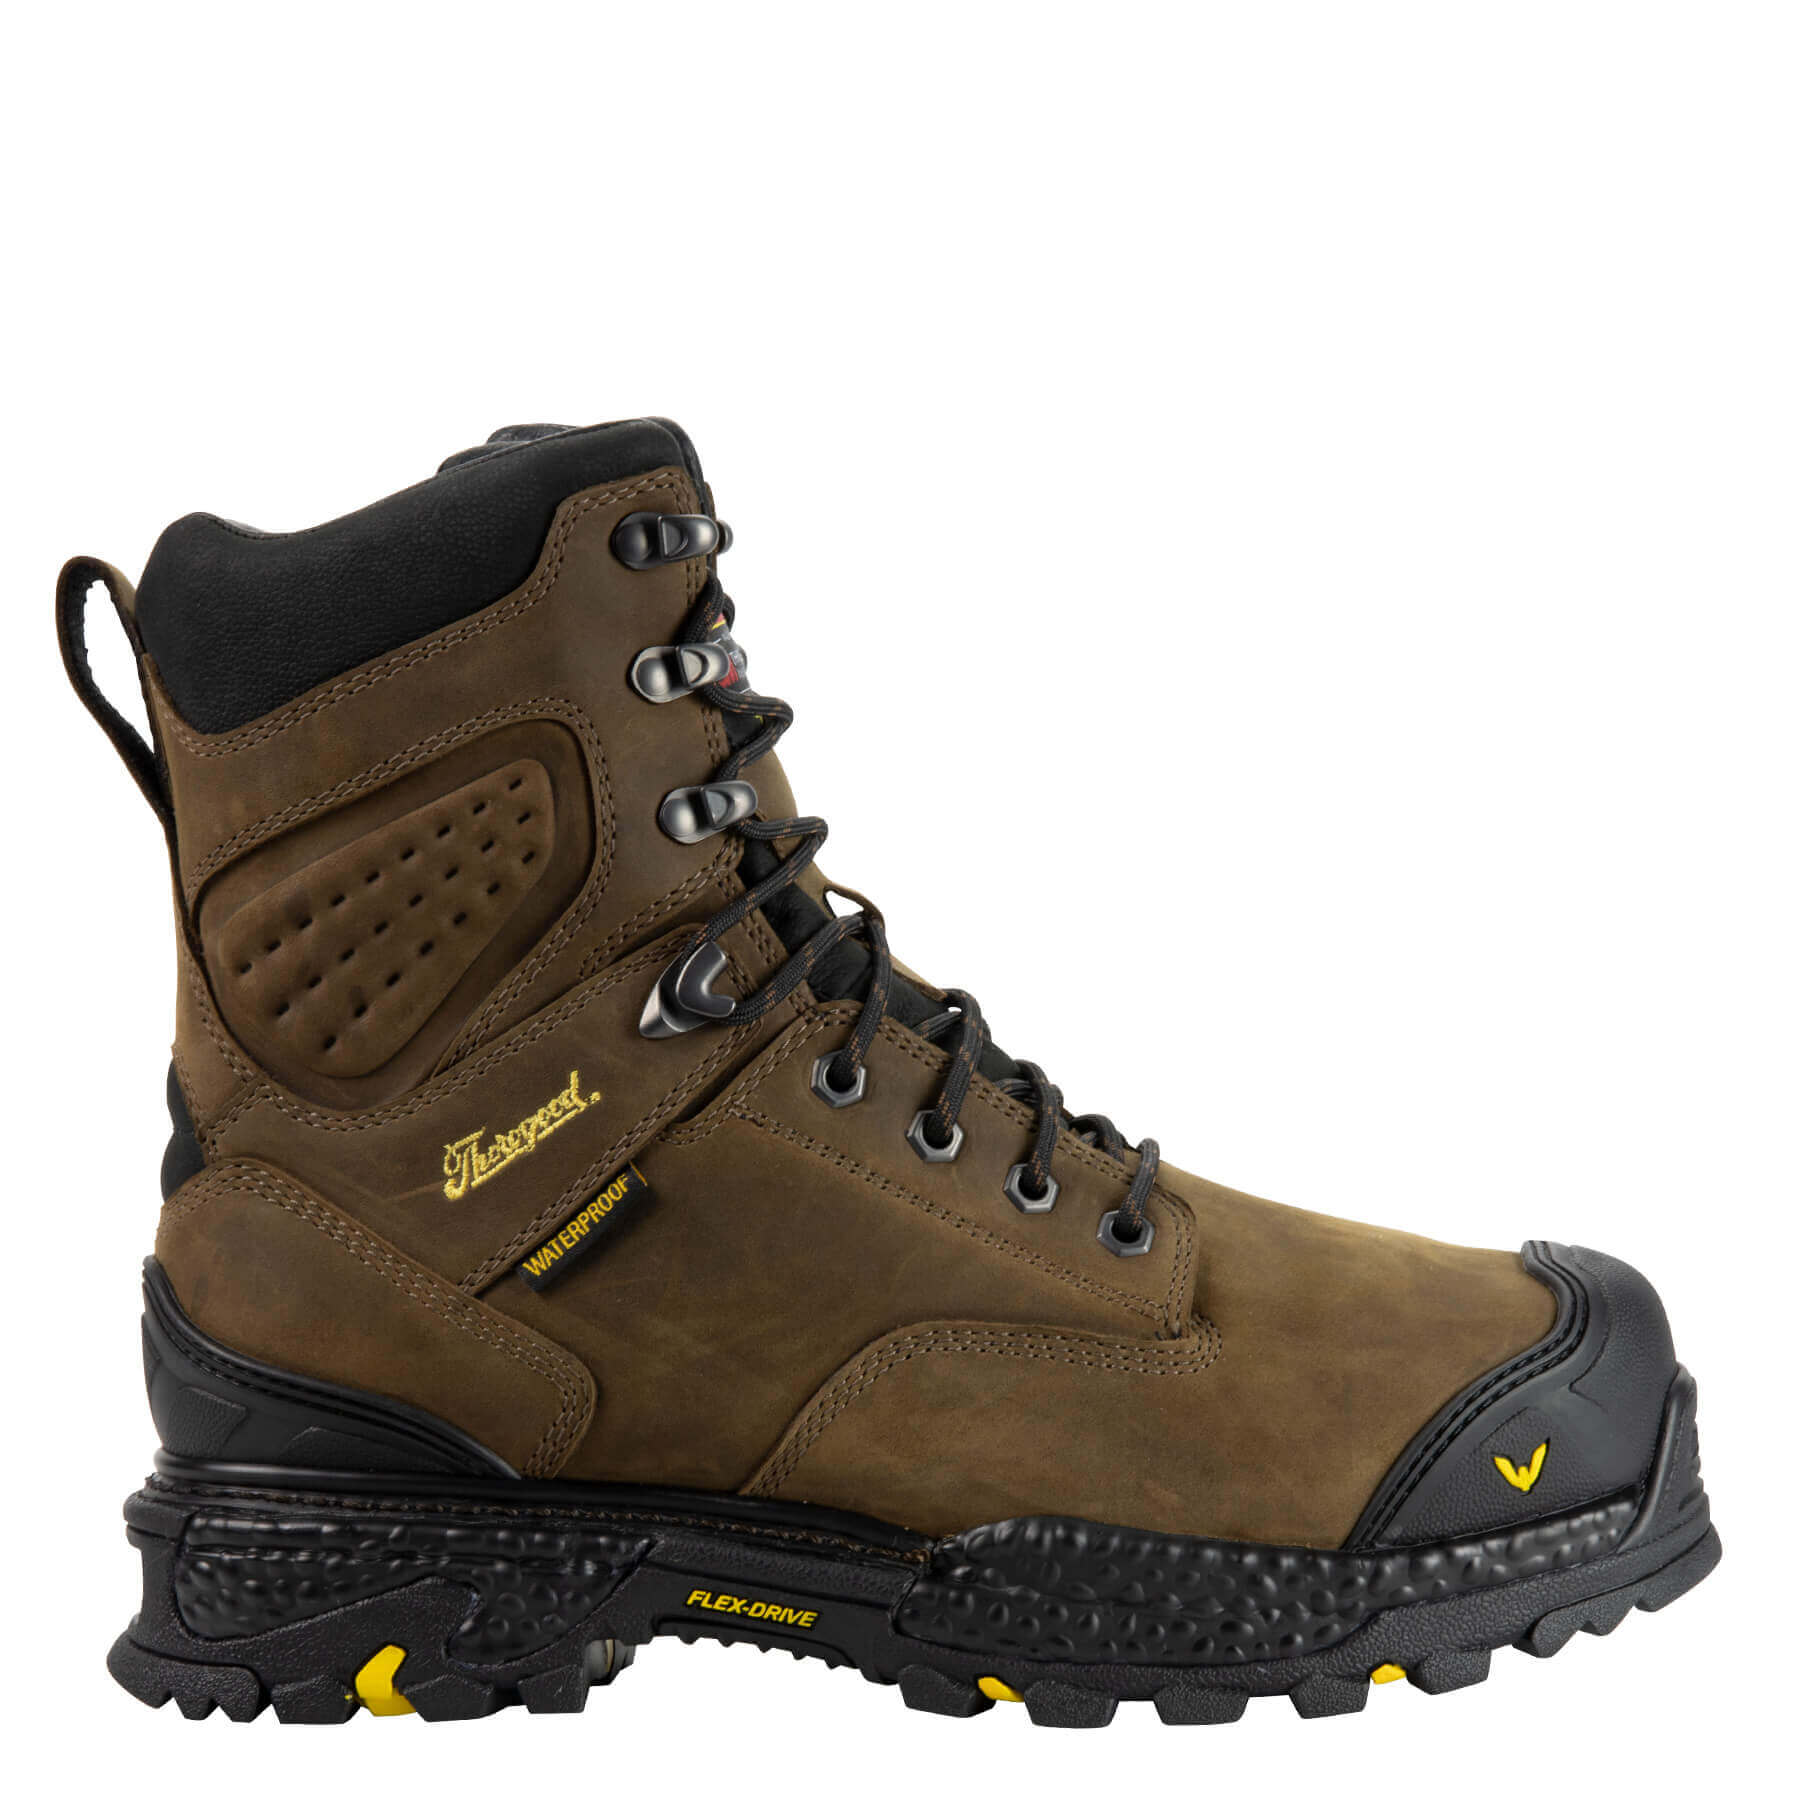 INFINITY FD SERIES   8" Studhorse Insulated Waterproof Safety Toe